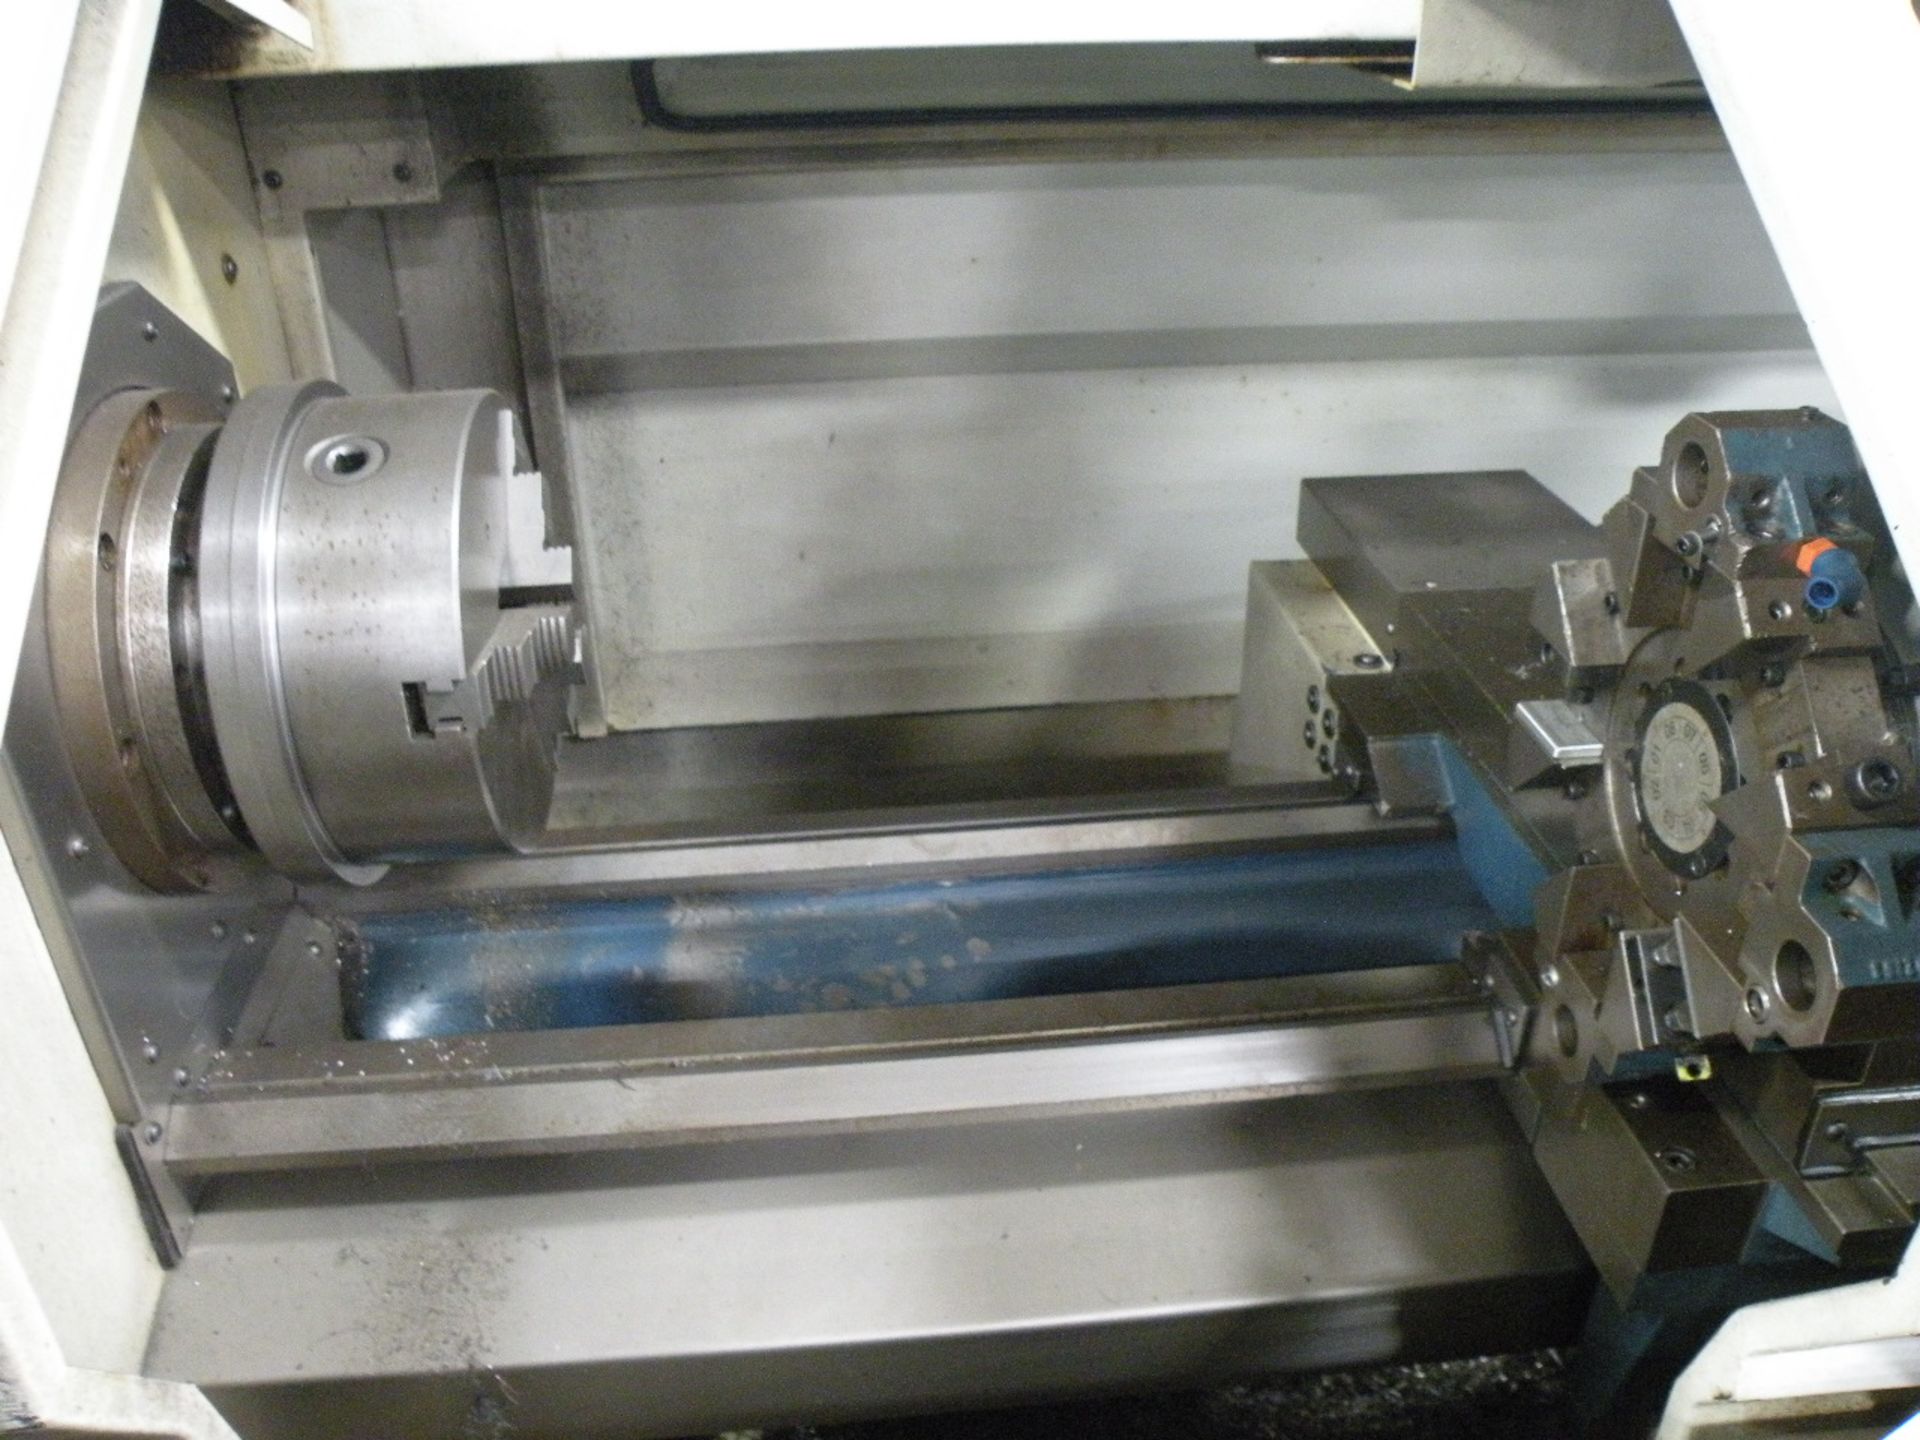 ROMI M17 CNC LATHE, Yr-2000, 3000 Max Spindle RPM (Hopkinsville) - Image 3 of 4